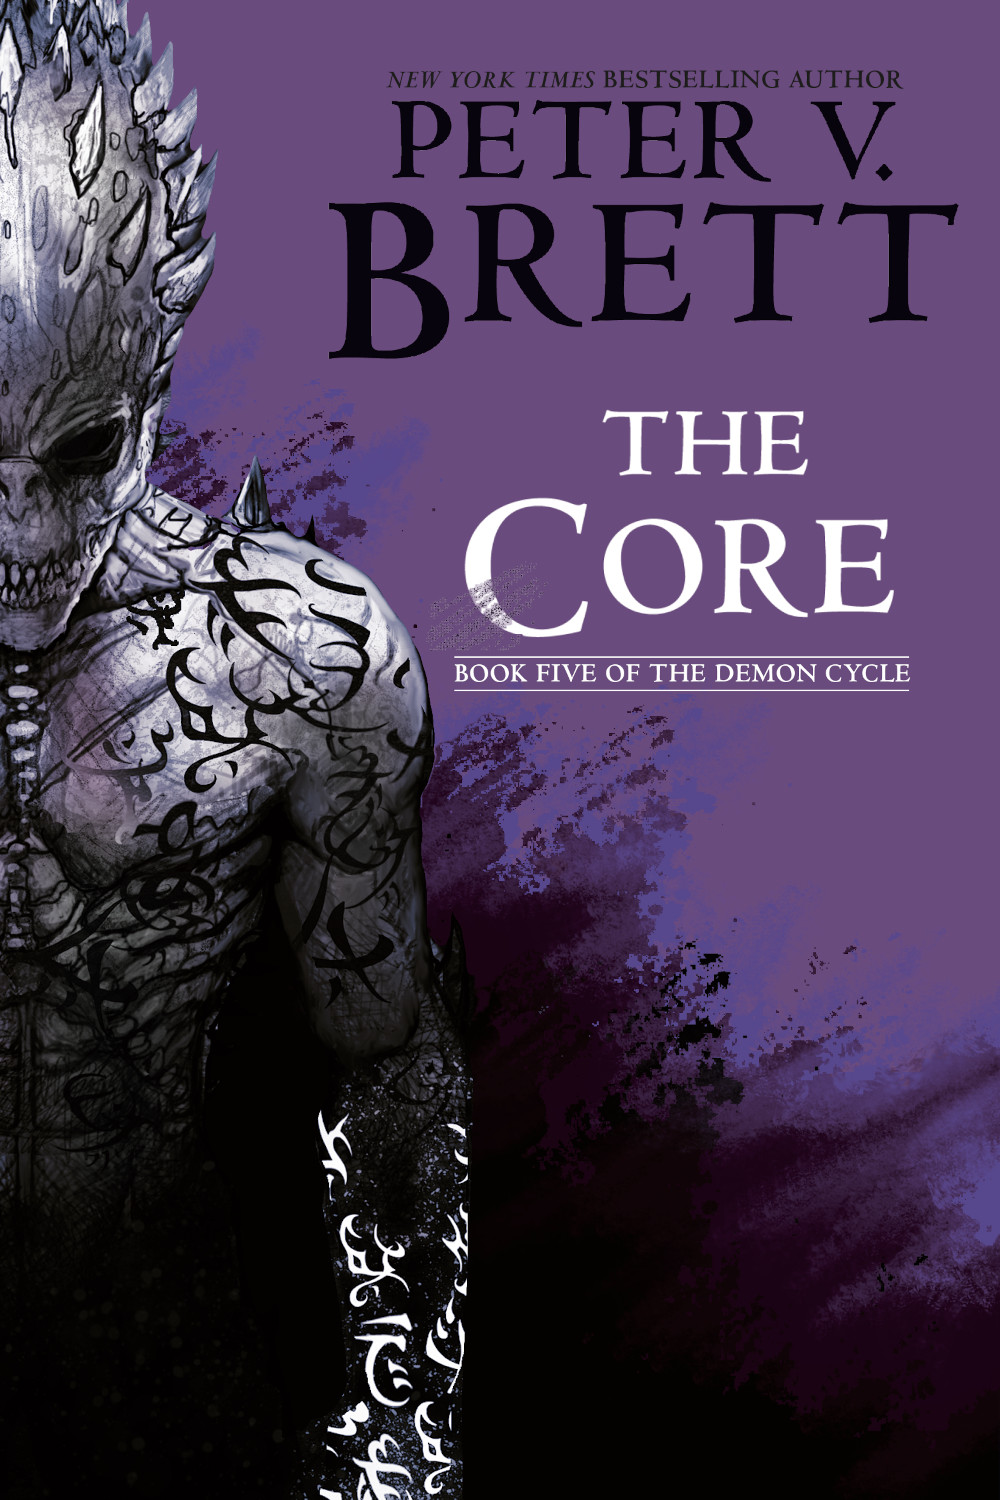 The Core by Peter V. Brett, Book Five of The Demon Cycle (US cover)